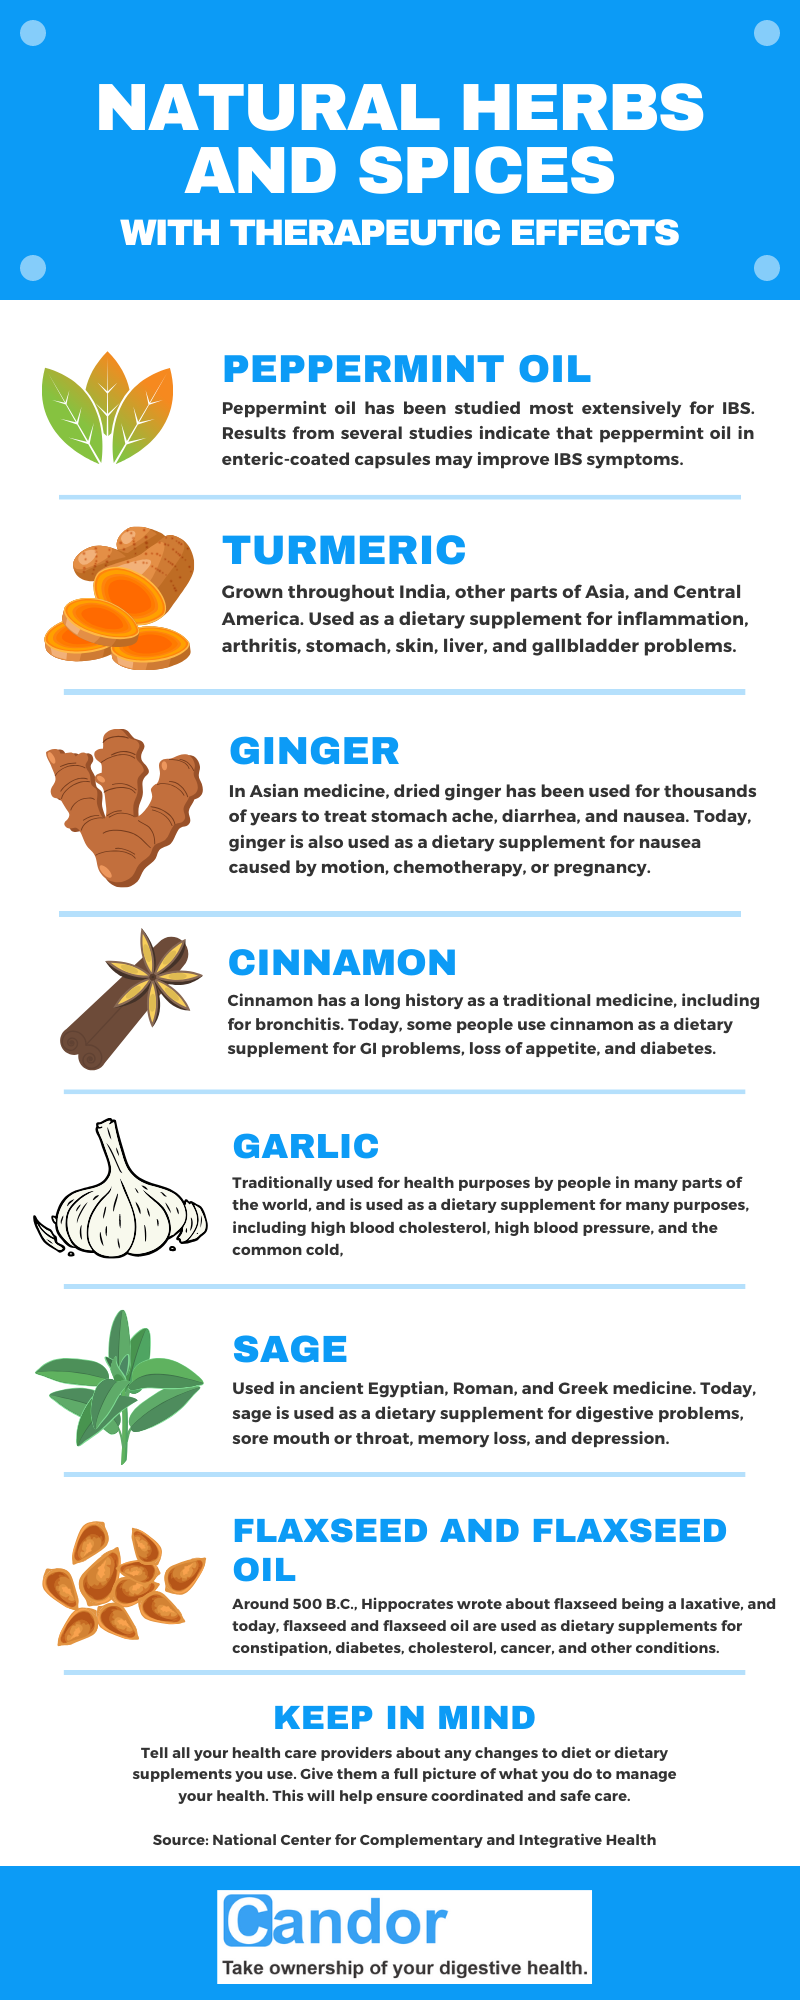 Natural Herbs and Spices